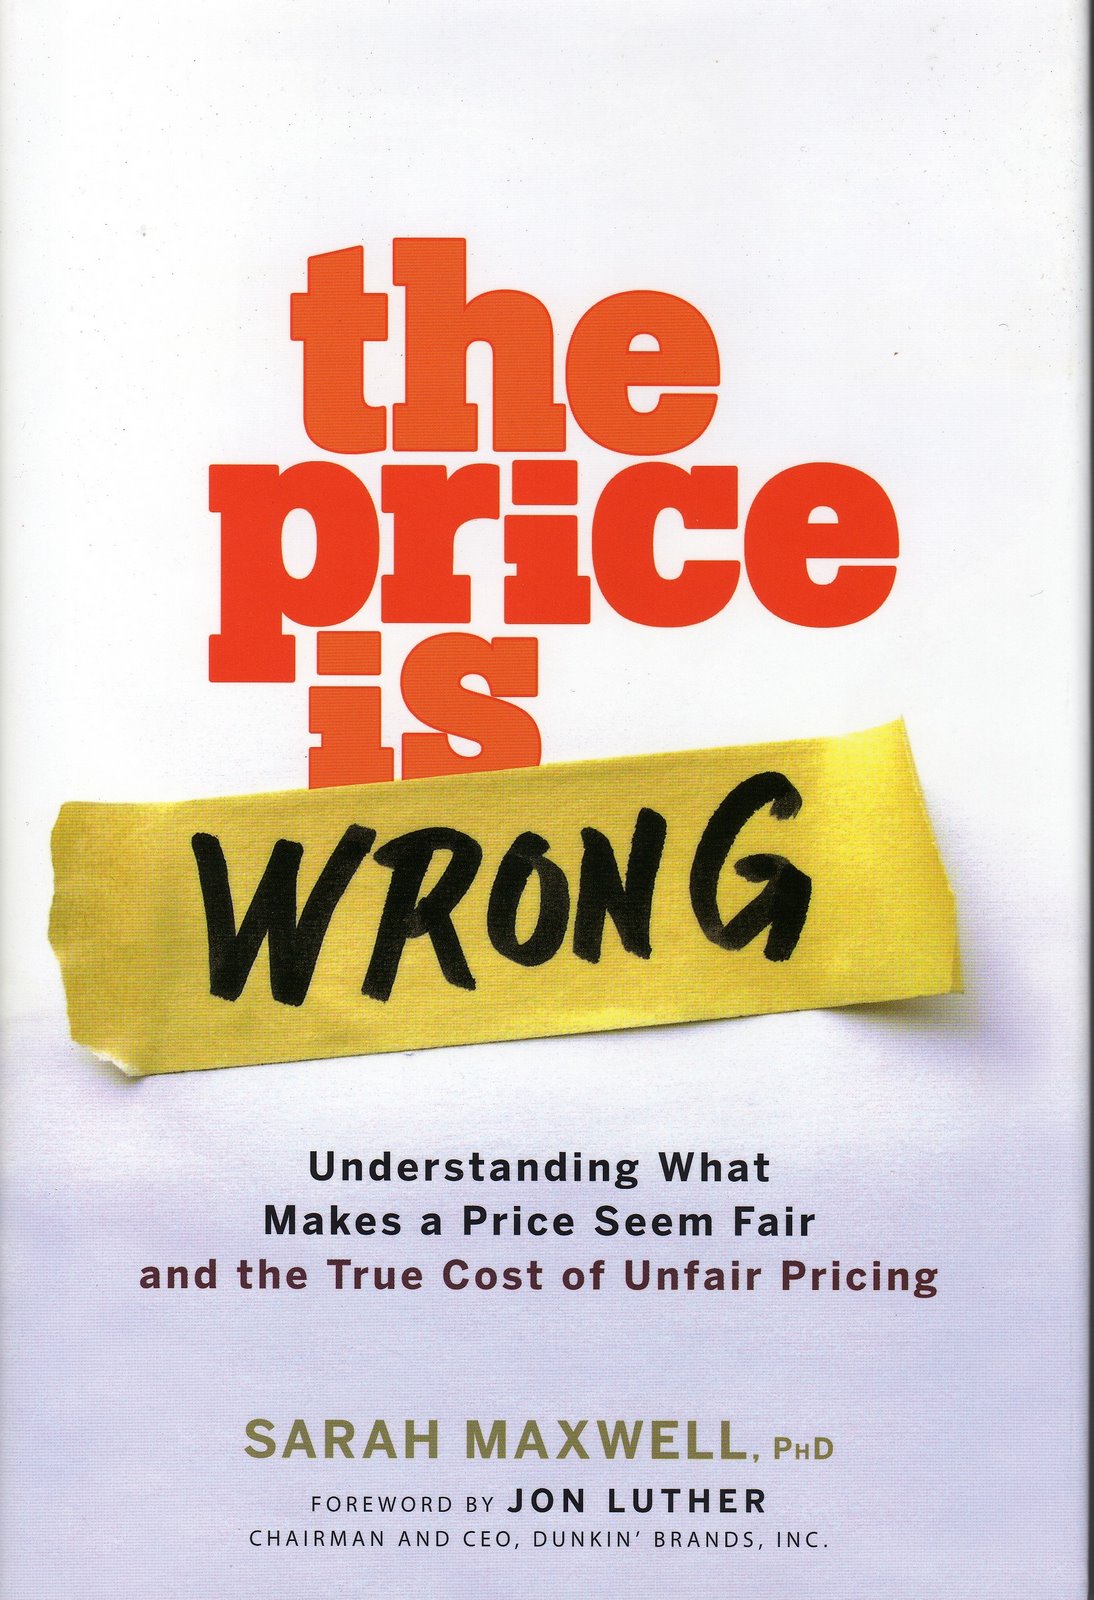 [The+Price+is+Wrong.JPG]